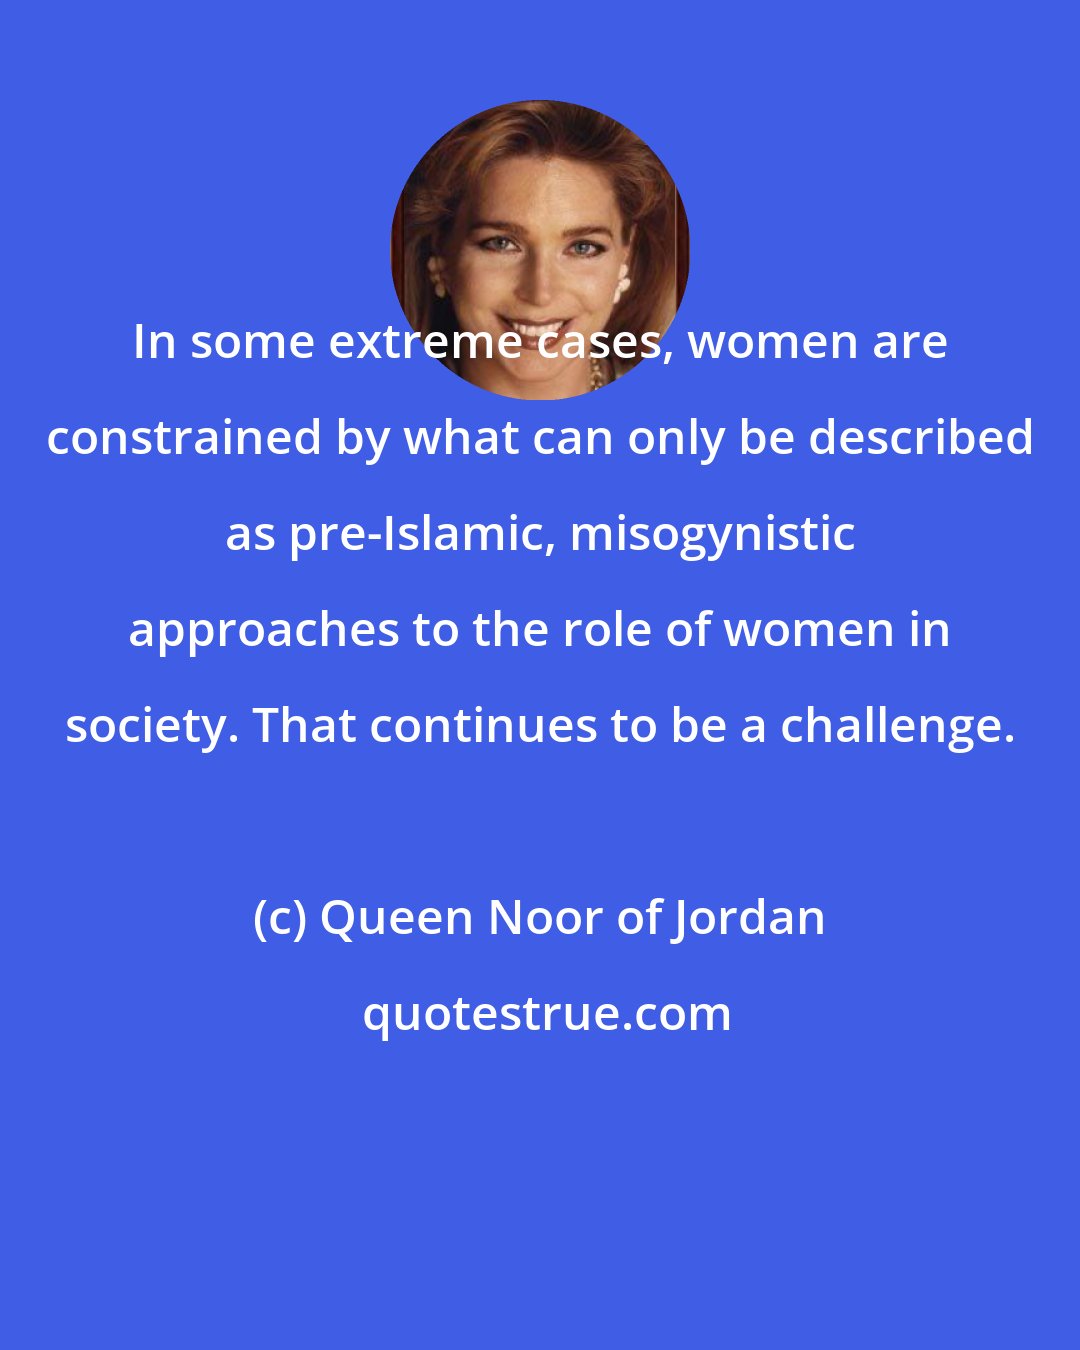 Queen Noor of Jordan: In some extreme cases, women are constrained by what can only be described as pre-Islamic, misogynistic approaches to the role of women in society. That continues to be a challenge.